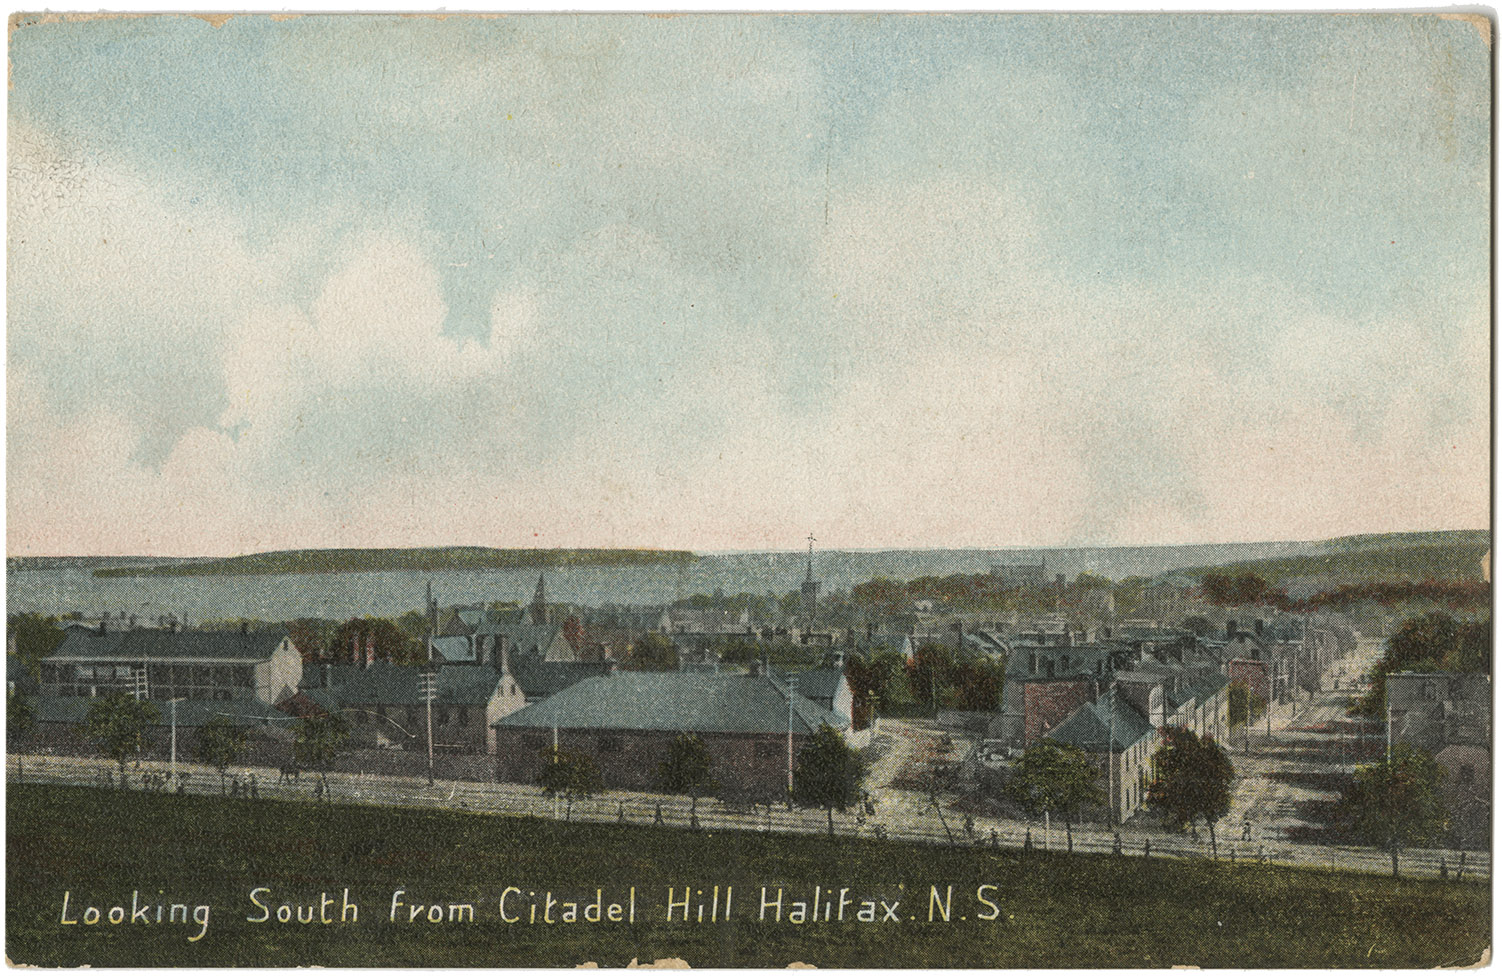 communityalbums - Looking South from Citadel Hill Halifax, N.S.